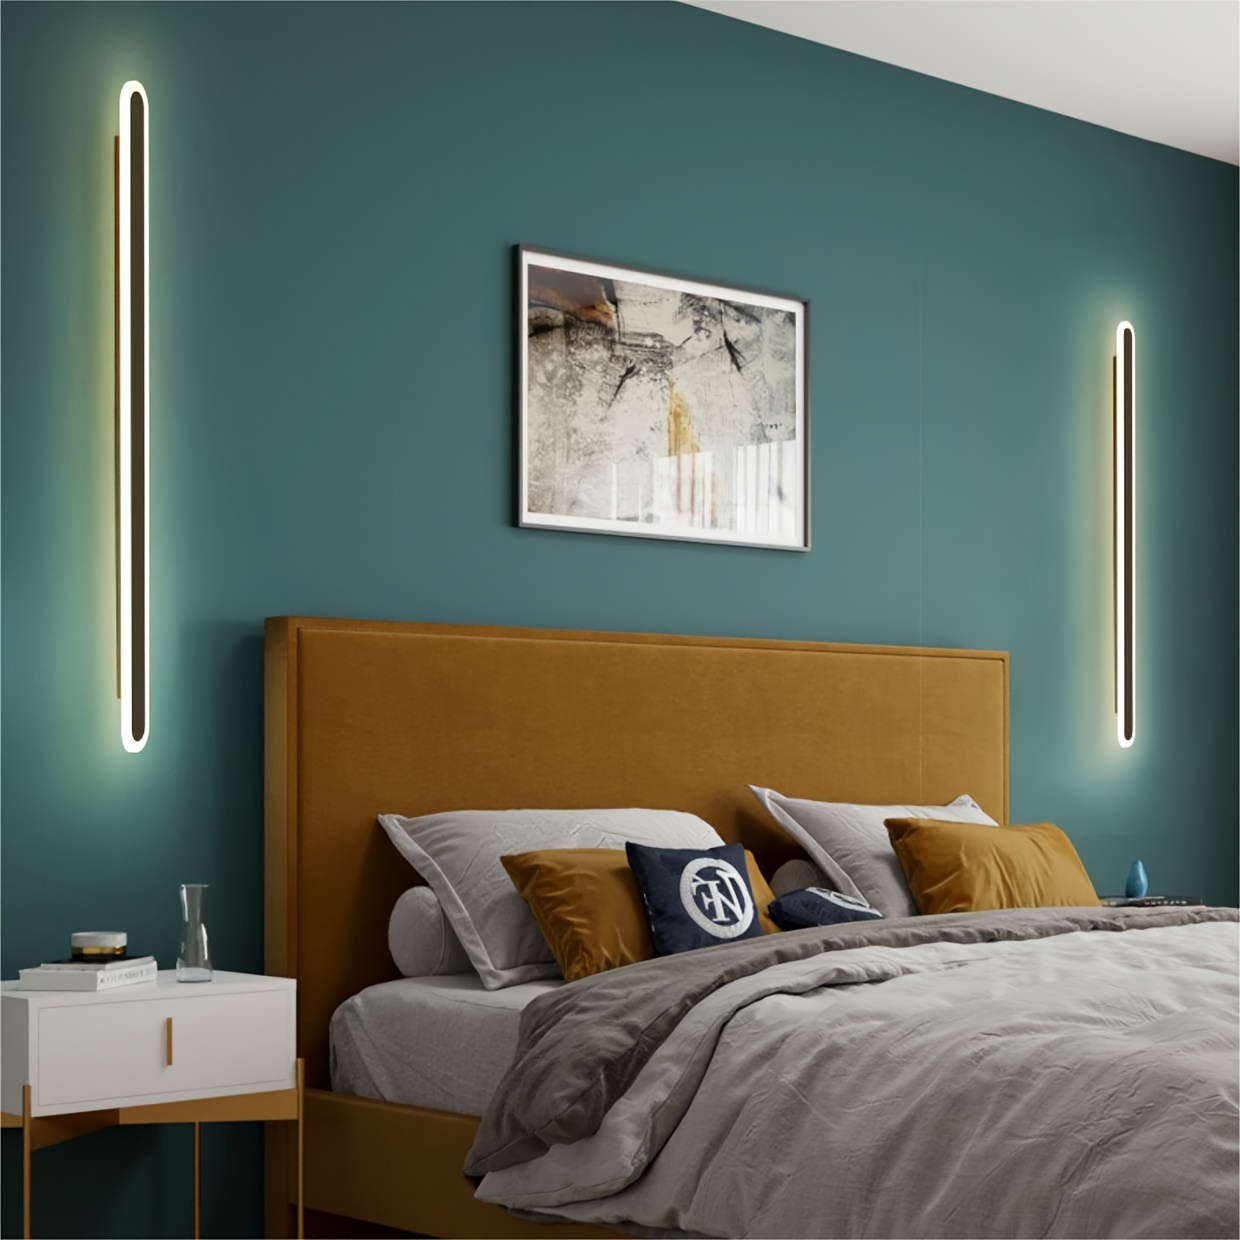 Led Wall Light Panel Square DIY Wall Decoration Lamp Bedside